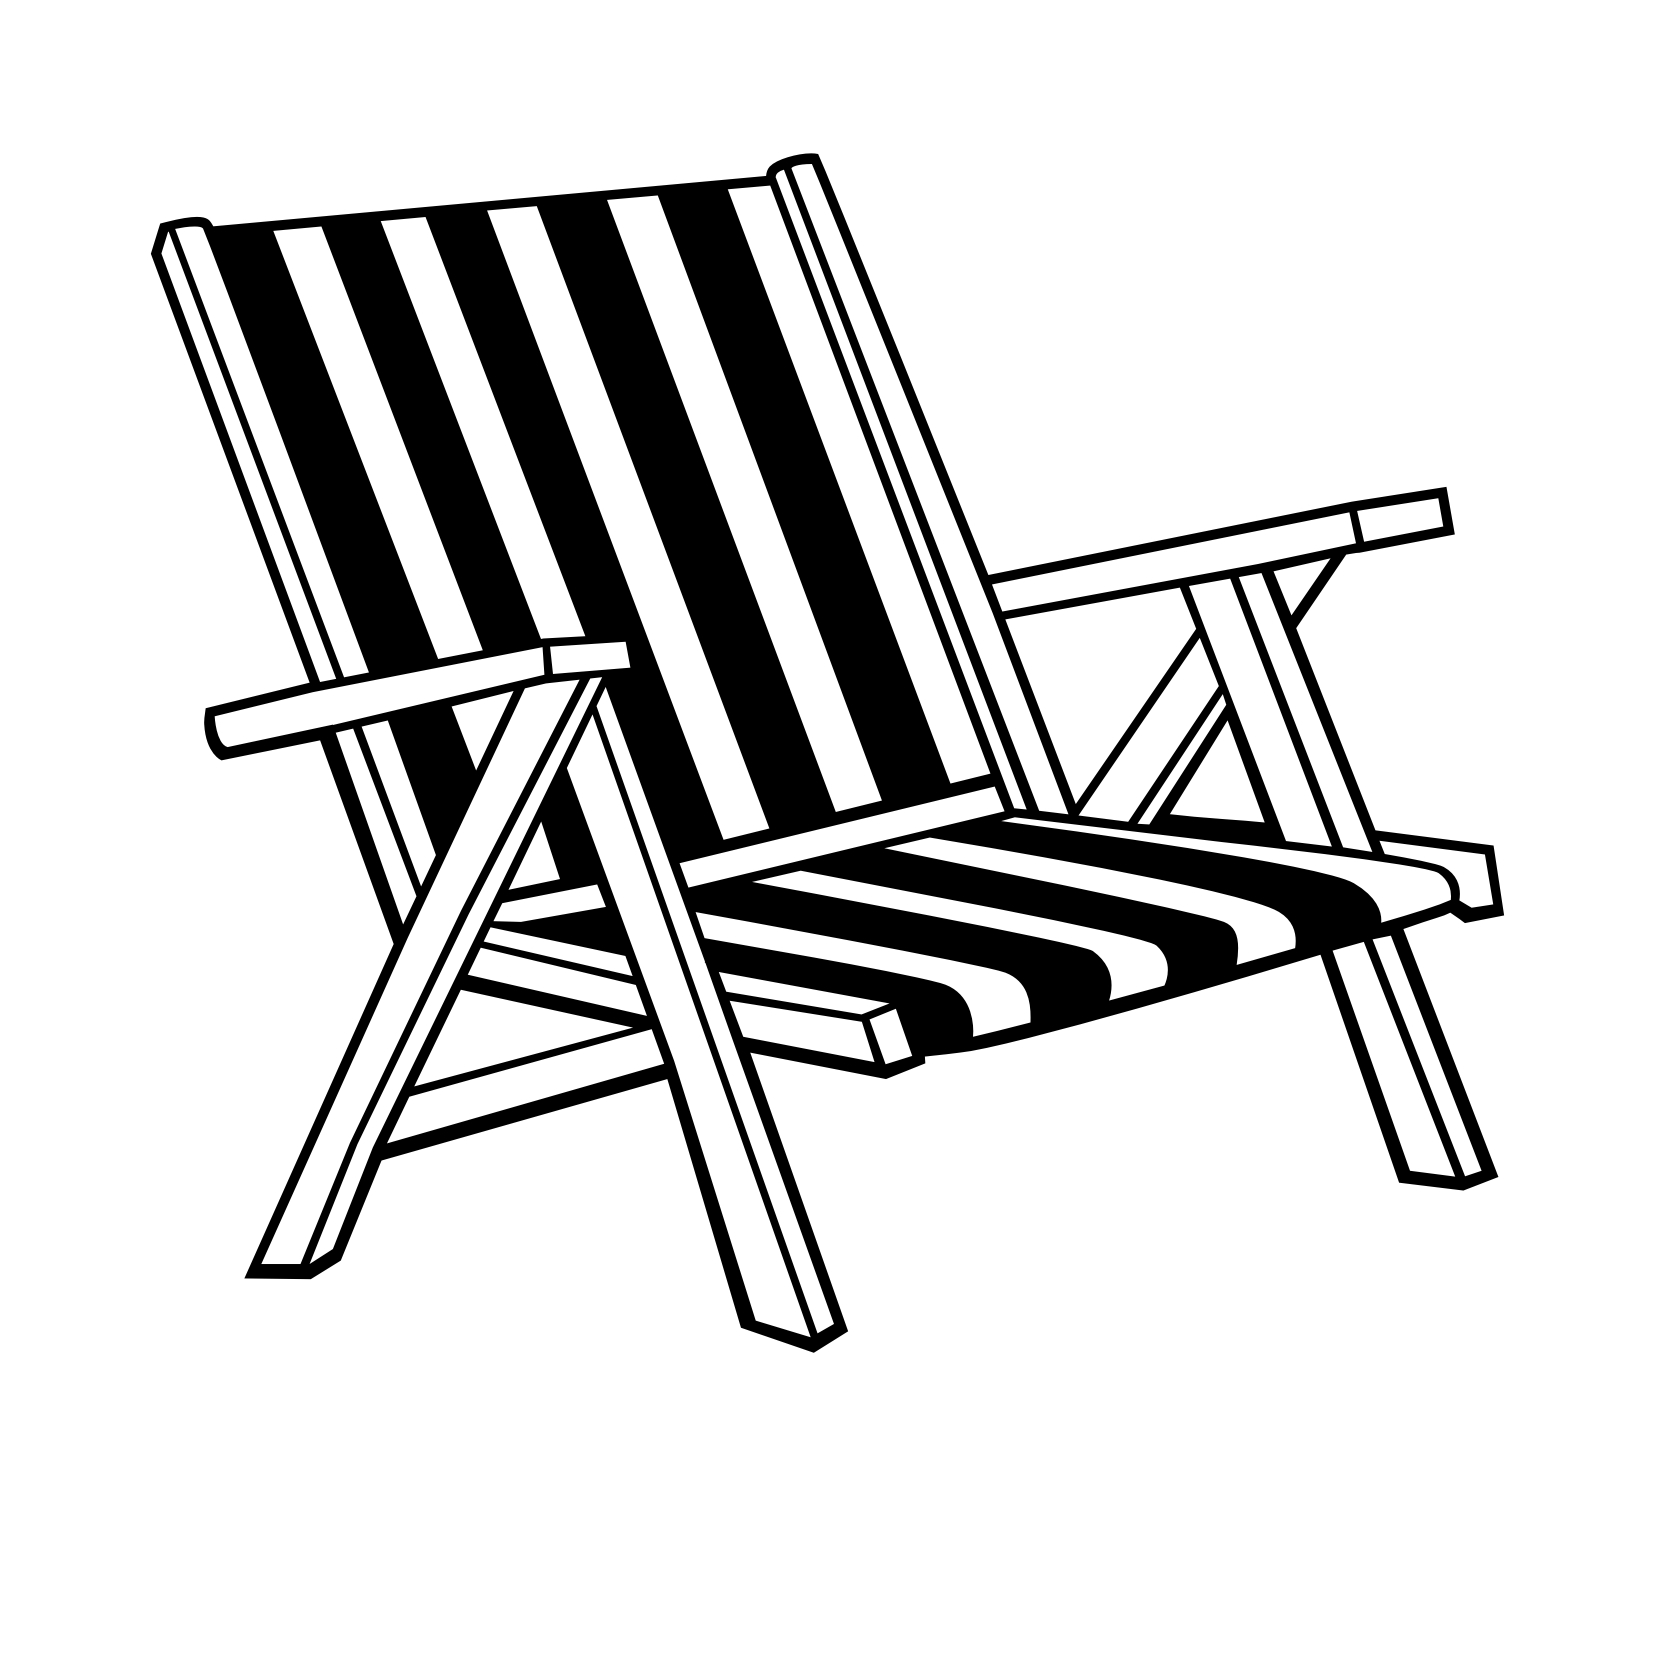 Free coloring pages of deck chair